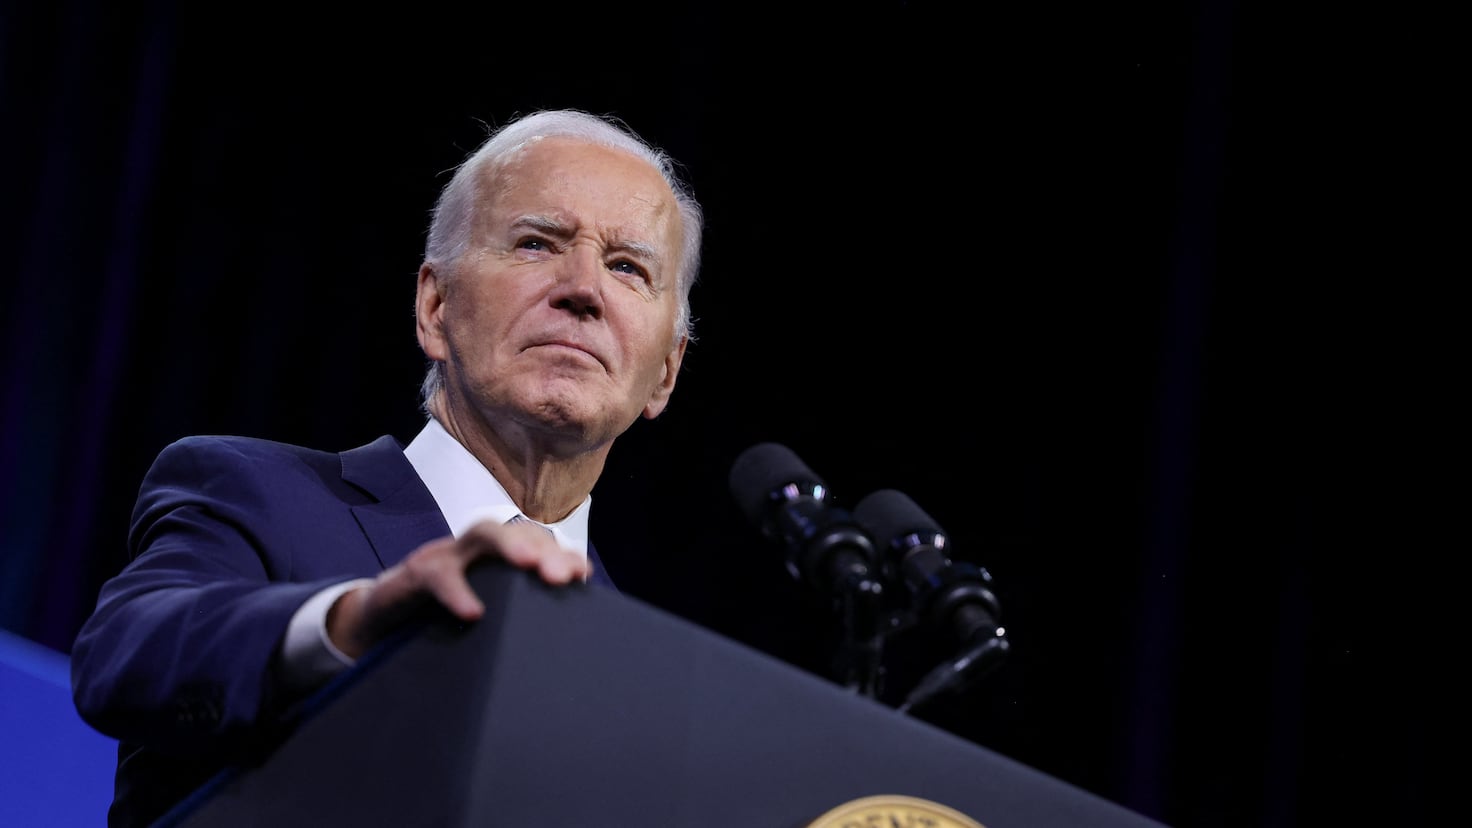 Biden admits he would withdraw his candidacy if doctors diagnose him with an illness